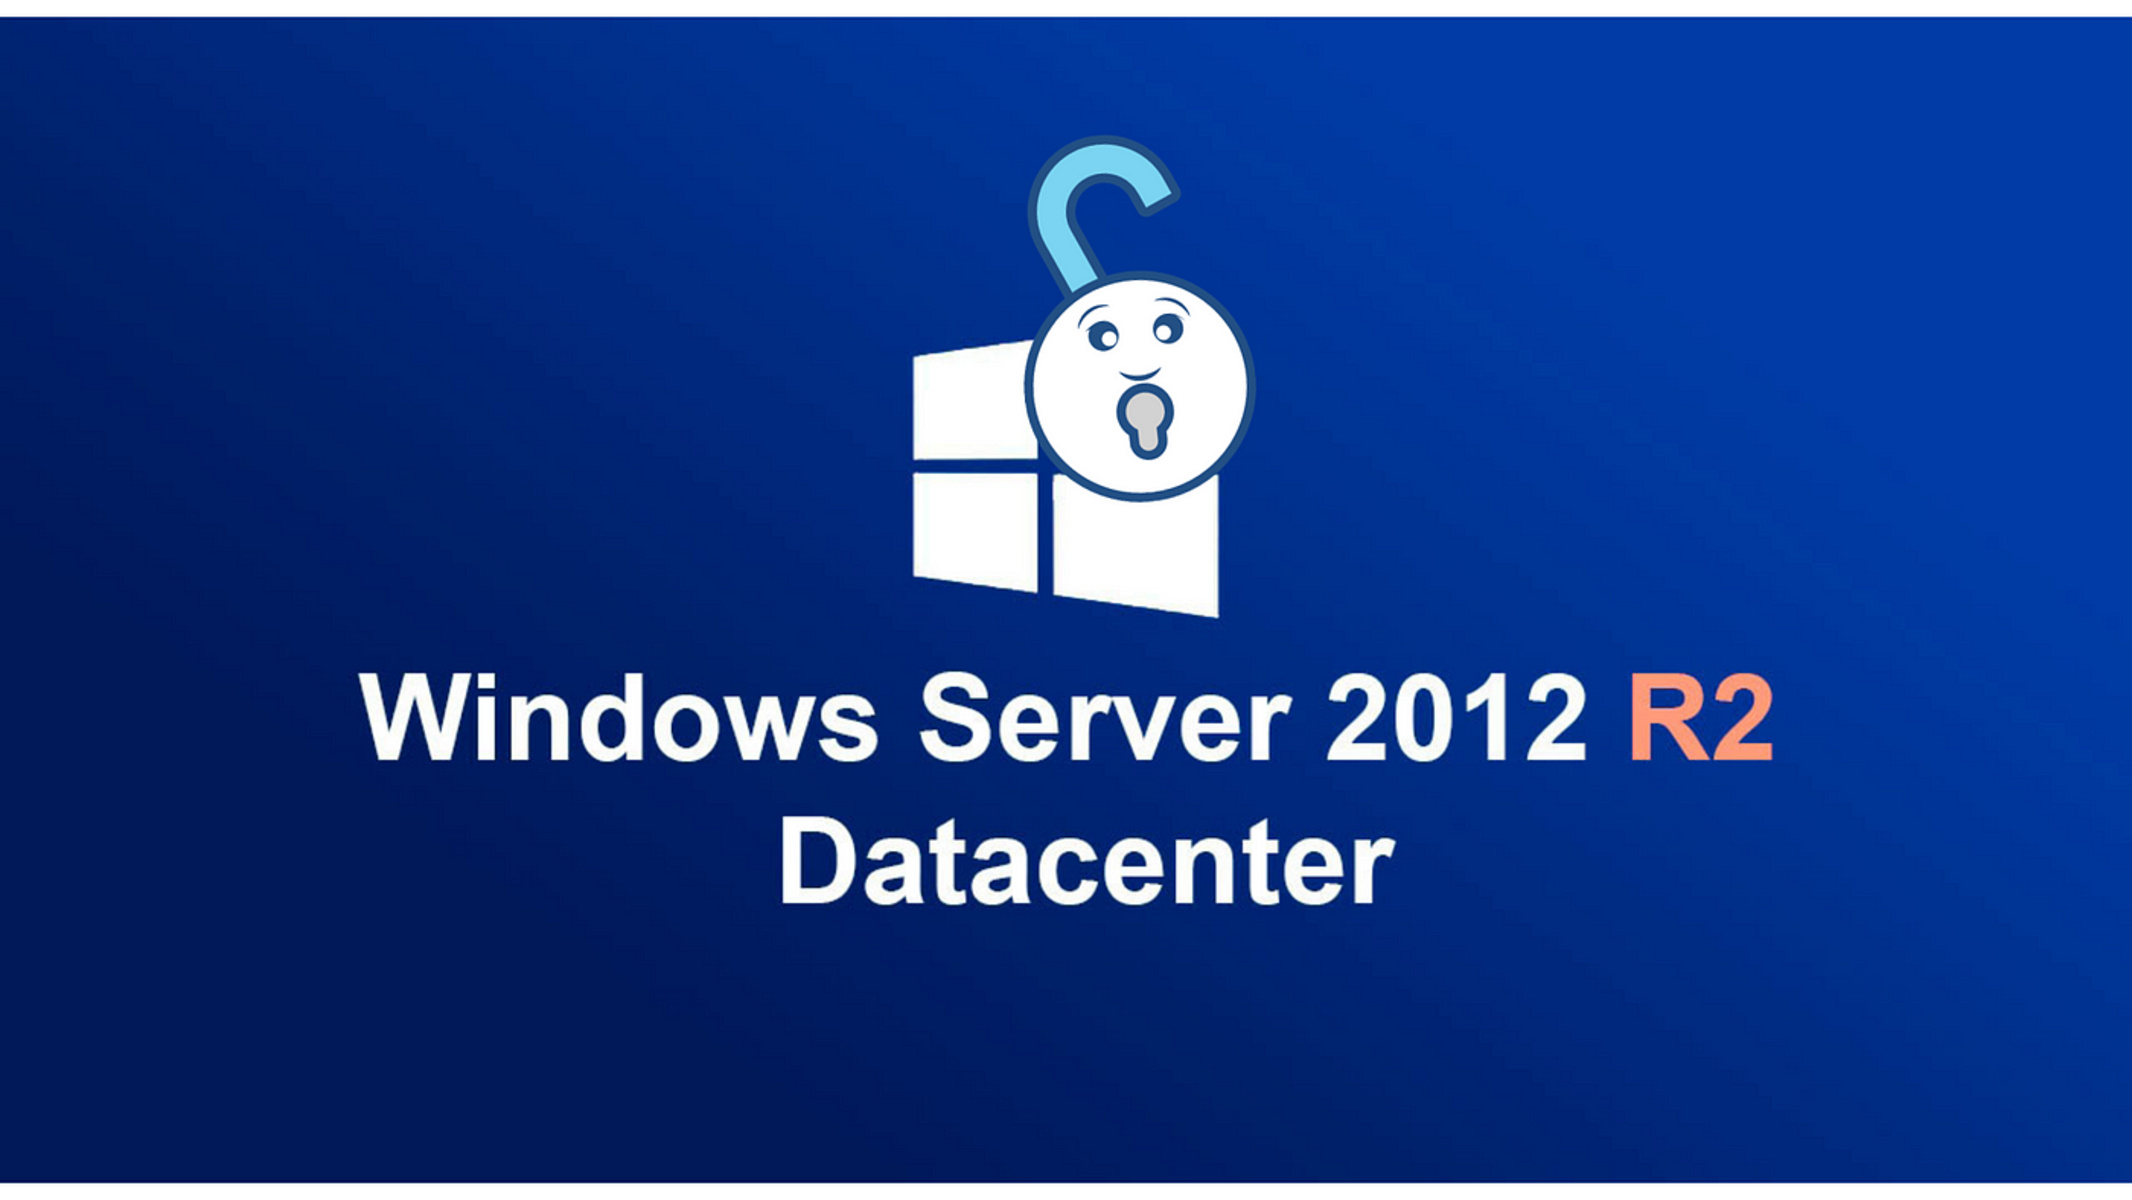 How To Install Windows Server 2012 R2 On VMware Workstation